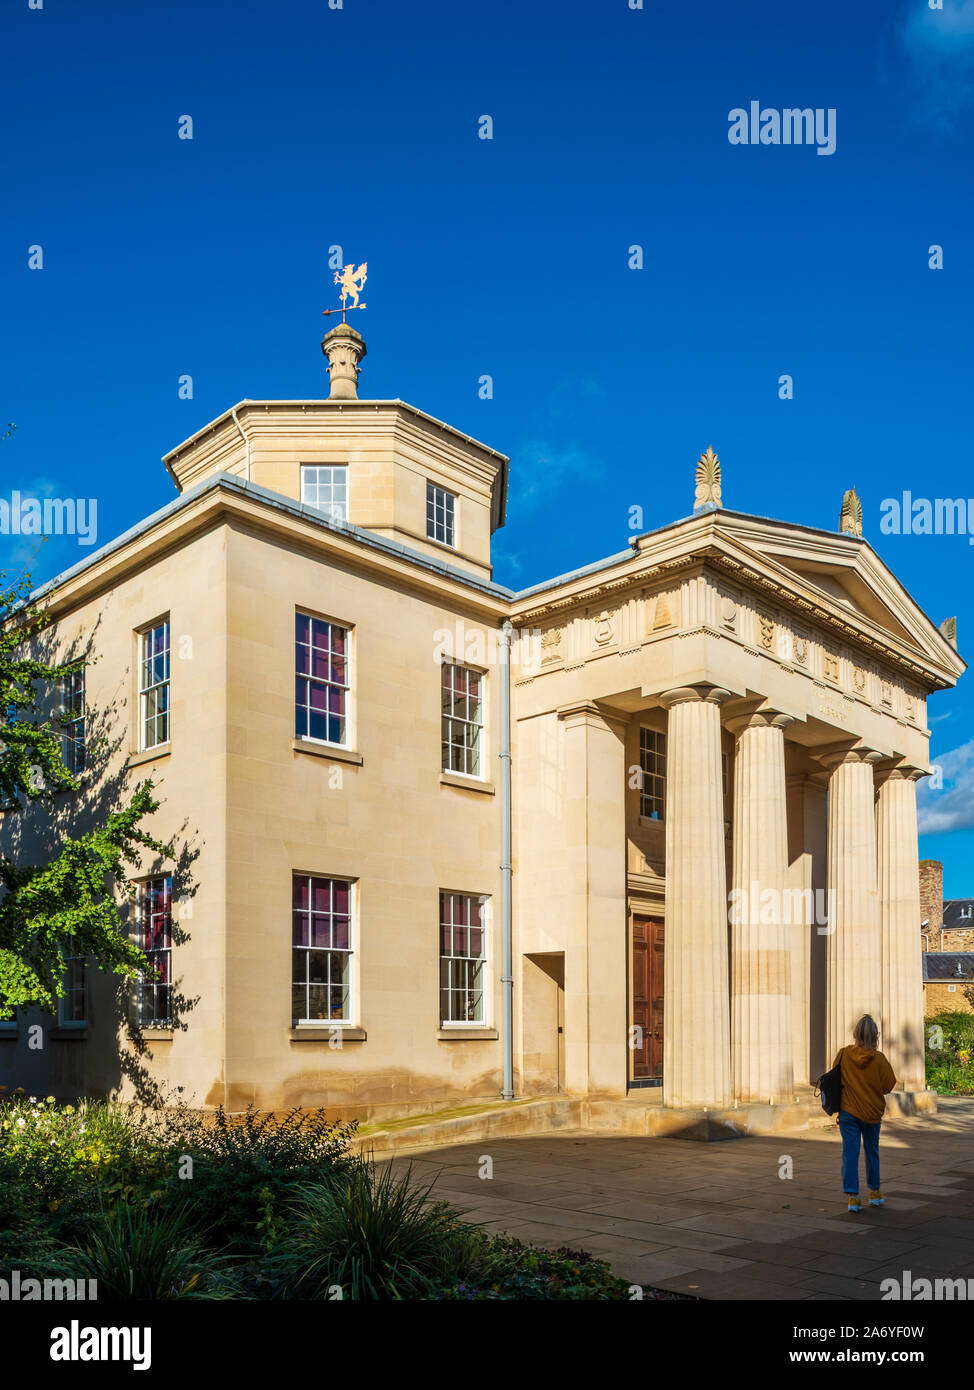 The Maitland Robinson Library (1992) in Downing College, part of the University of Cambridge UK. Architects Quinlan Terry, opened 1993 Stock Photo